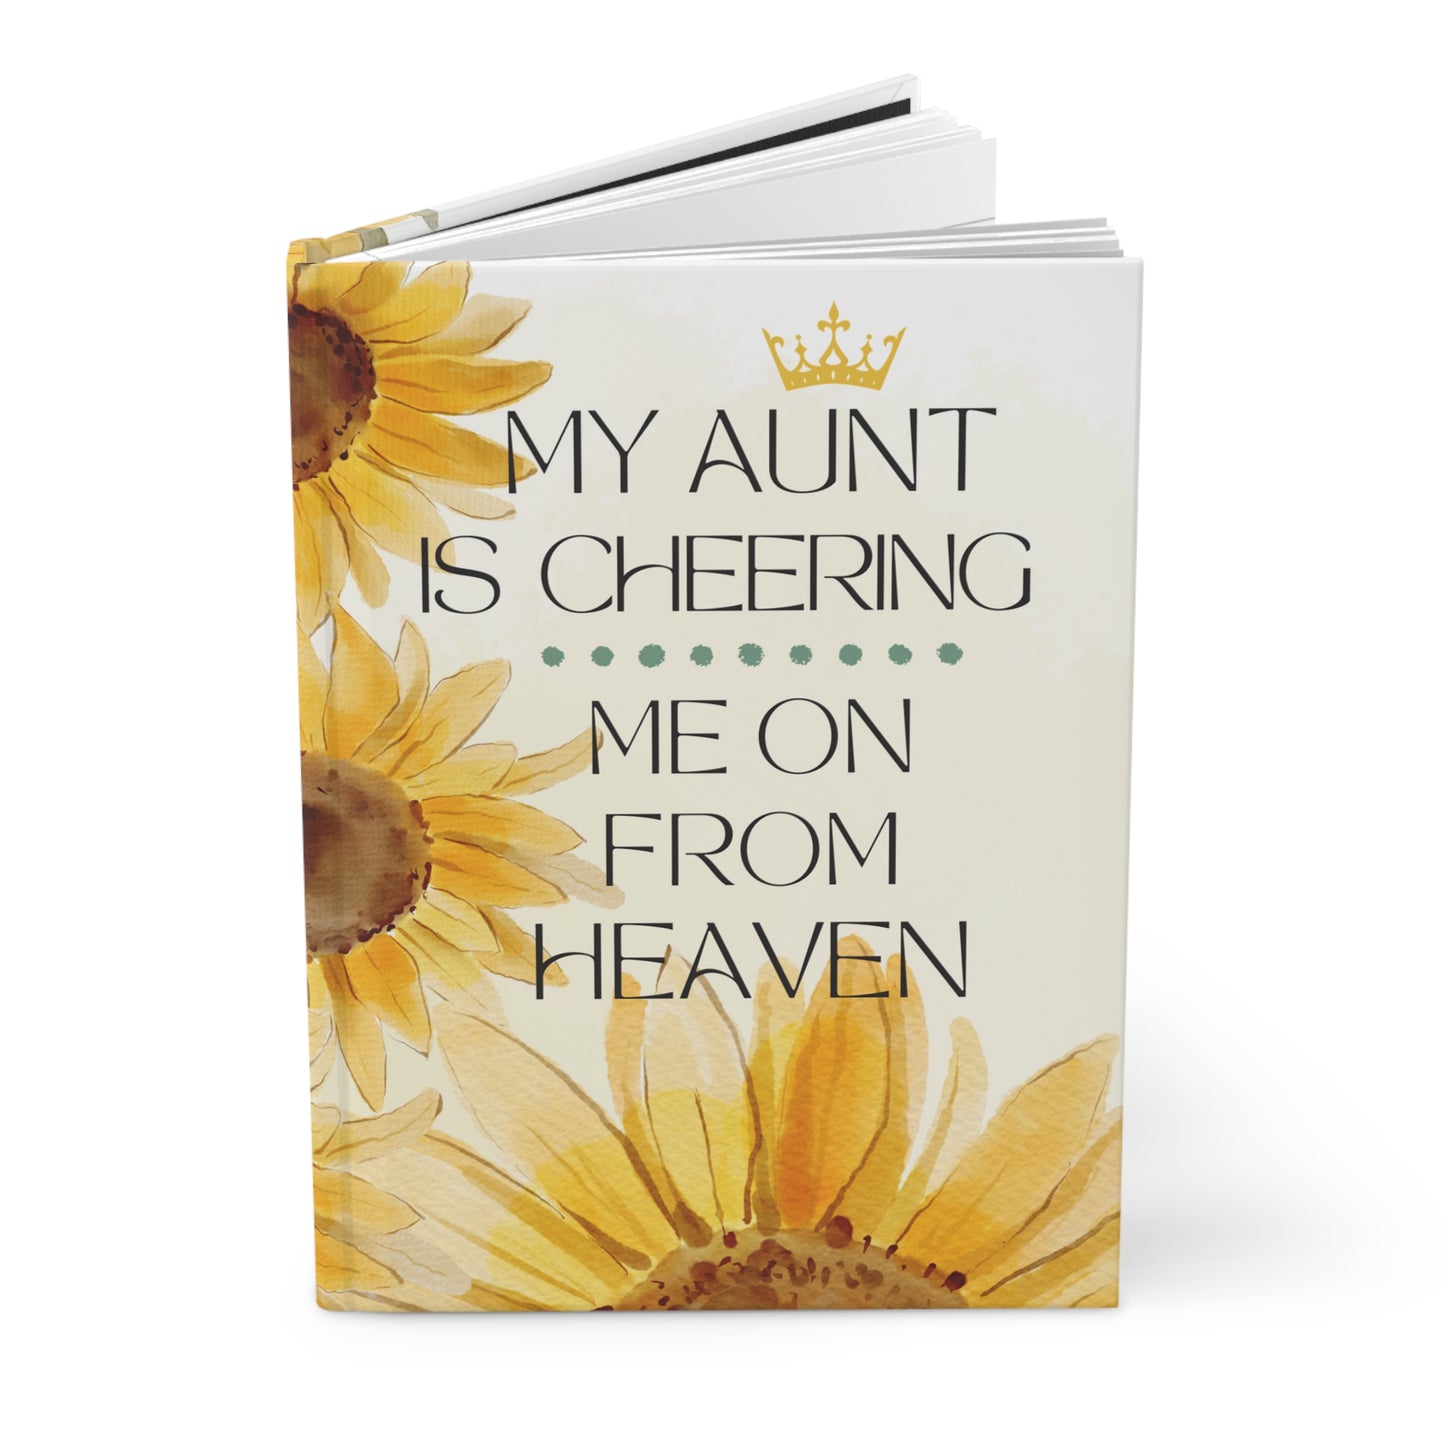 Grief Journal for Loss of Aunt, Cheering Me On From Heaven